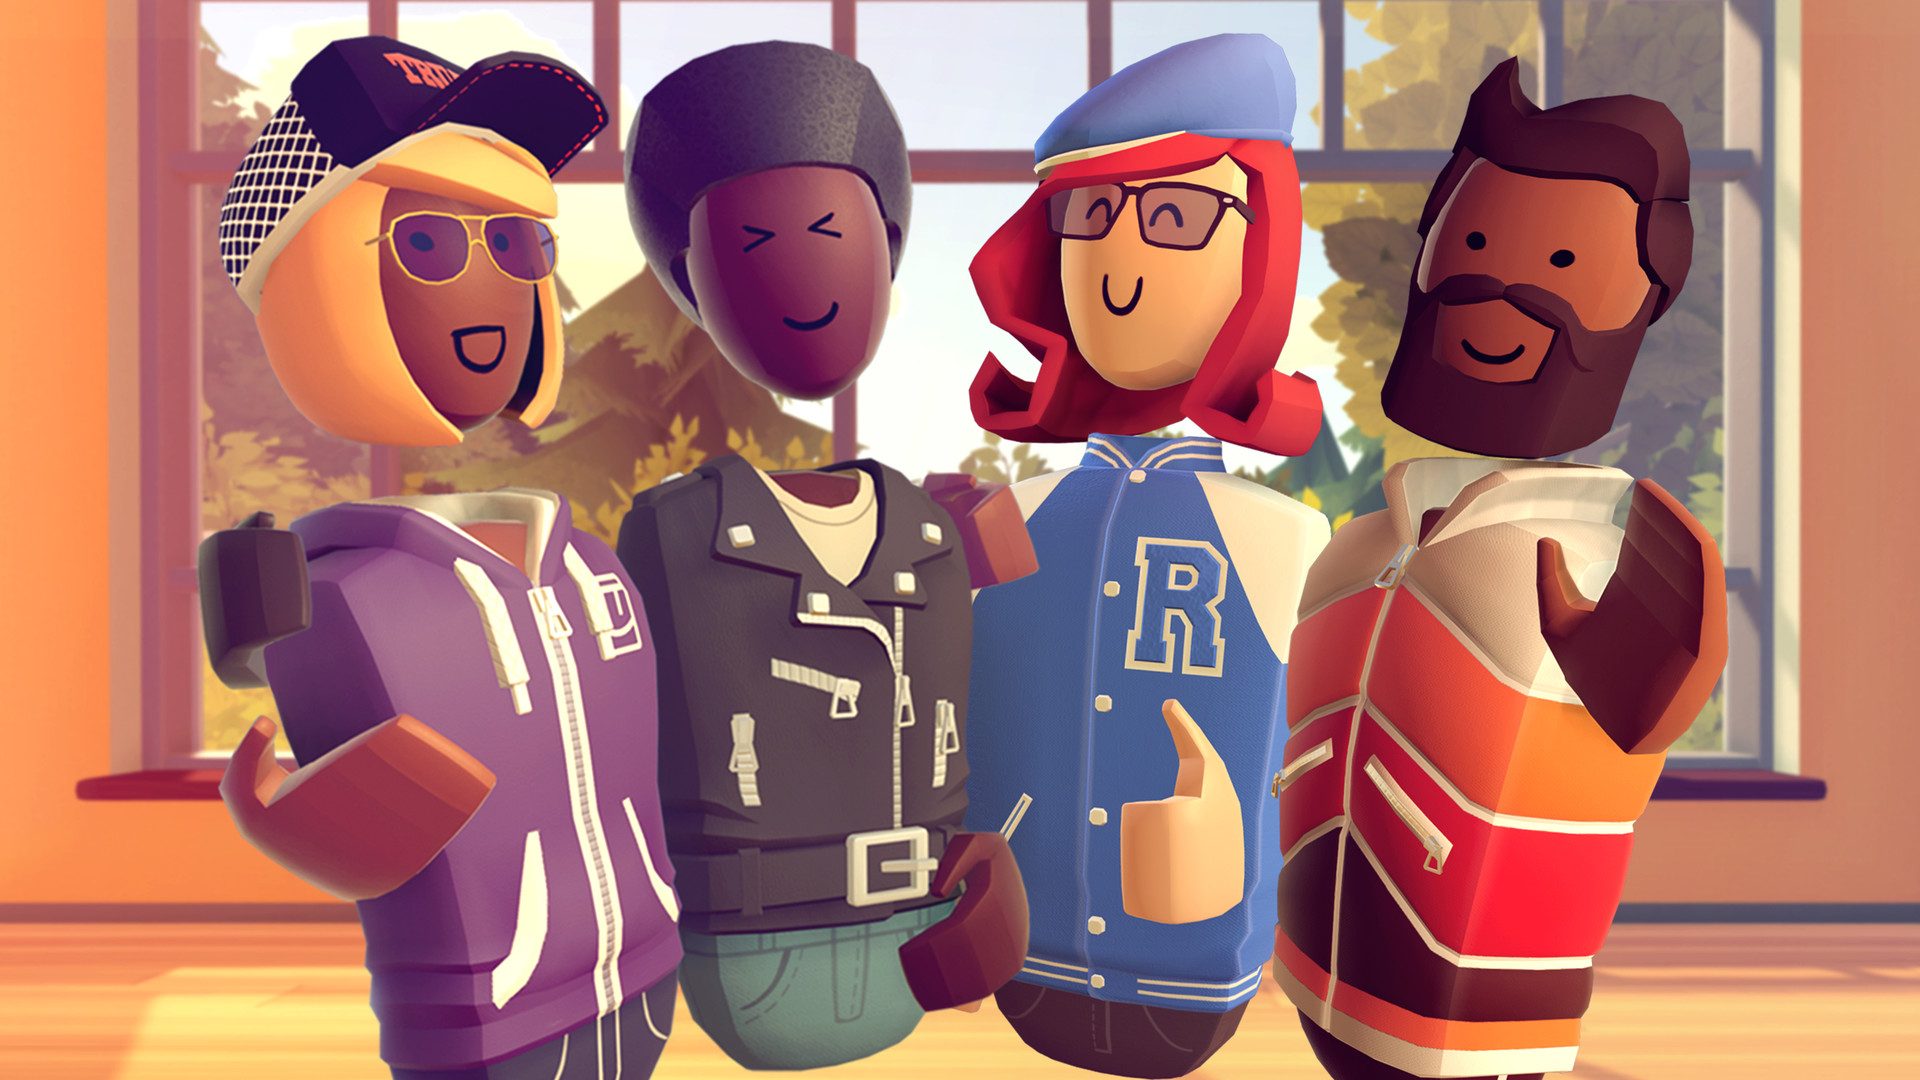 Rec Room' Adds More Flexibility to Avatar System with New Full-body,  Animated Costumes – Road to VR